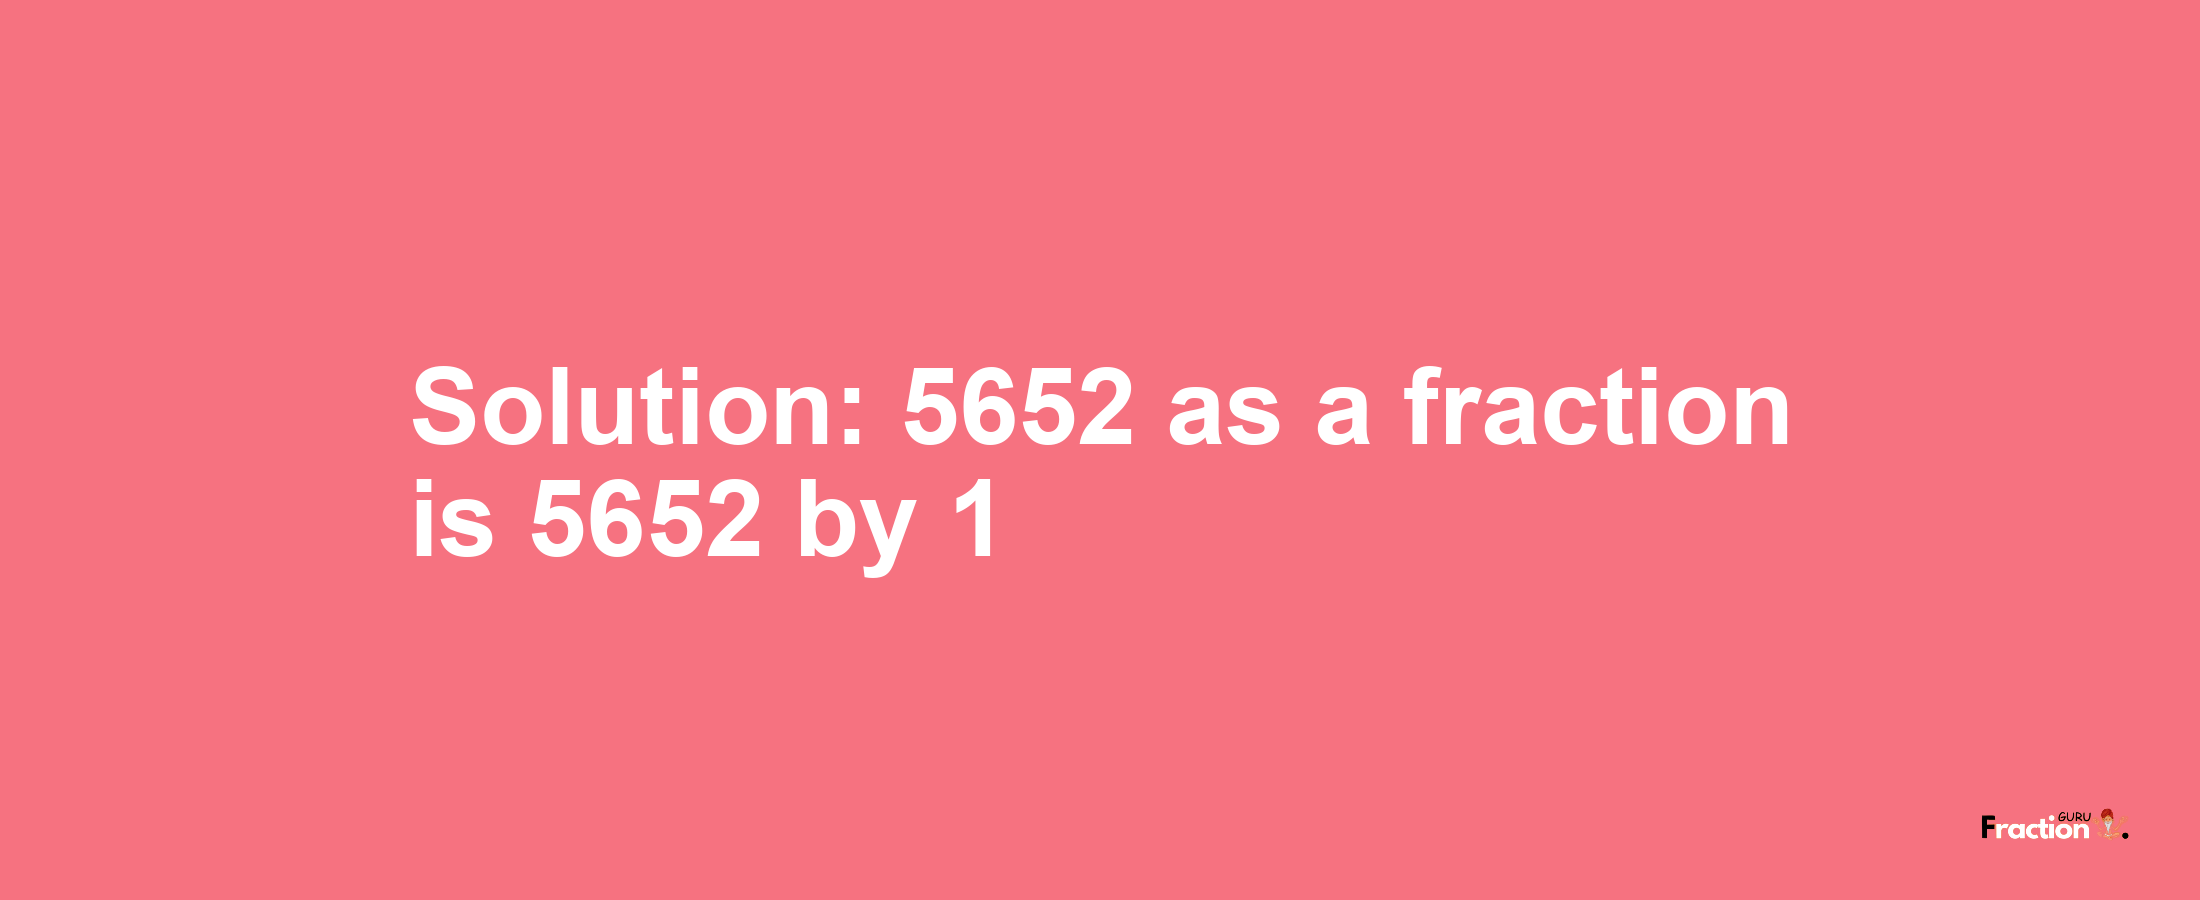 Solution:5652 as a fraction is 5652/1